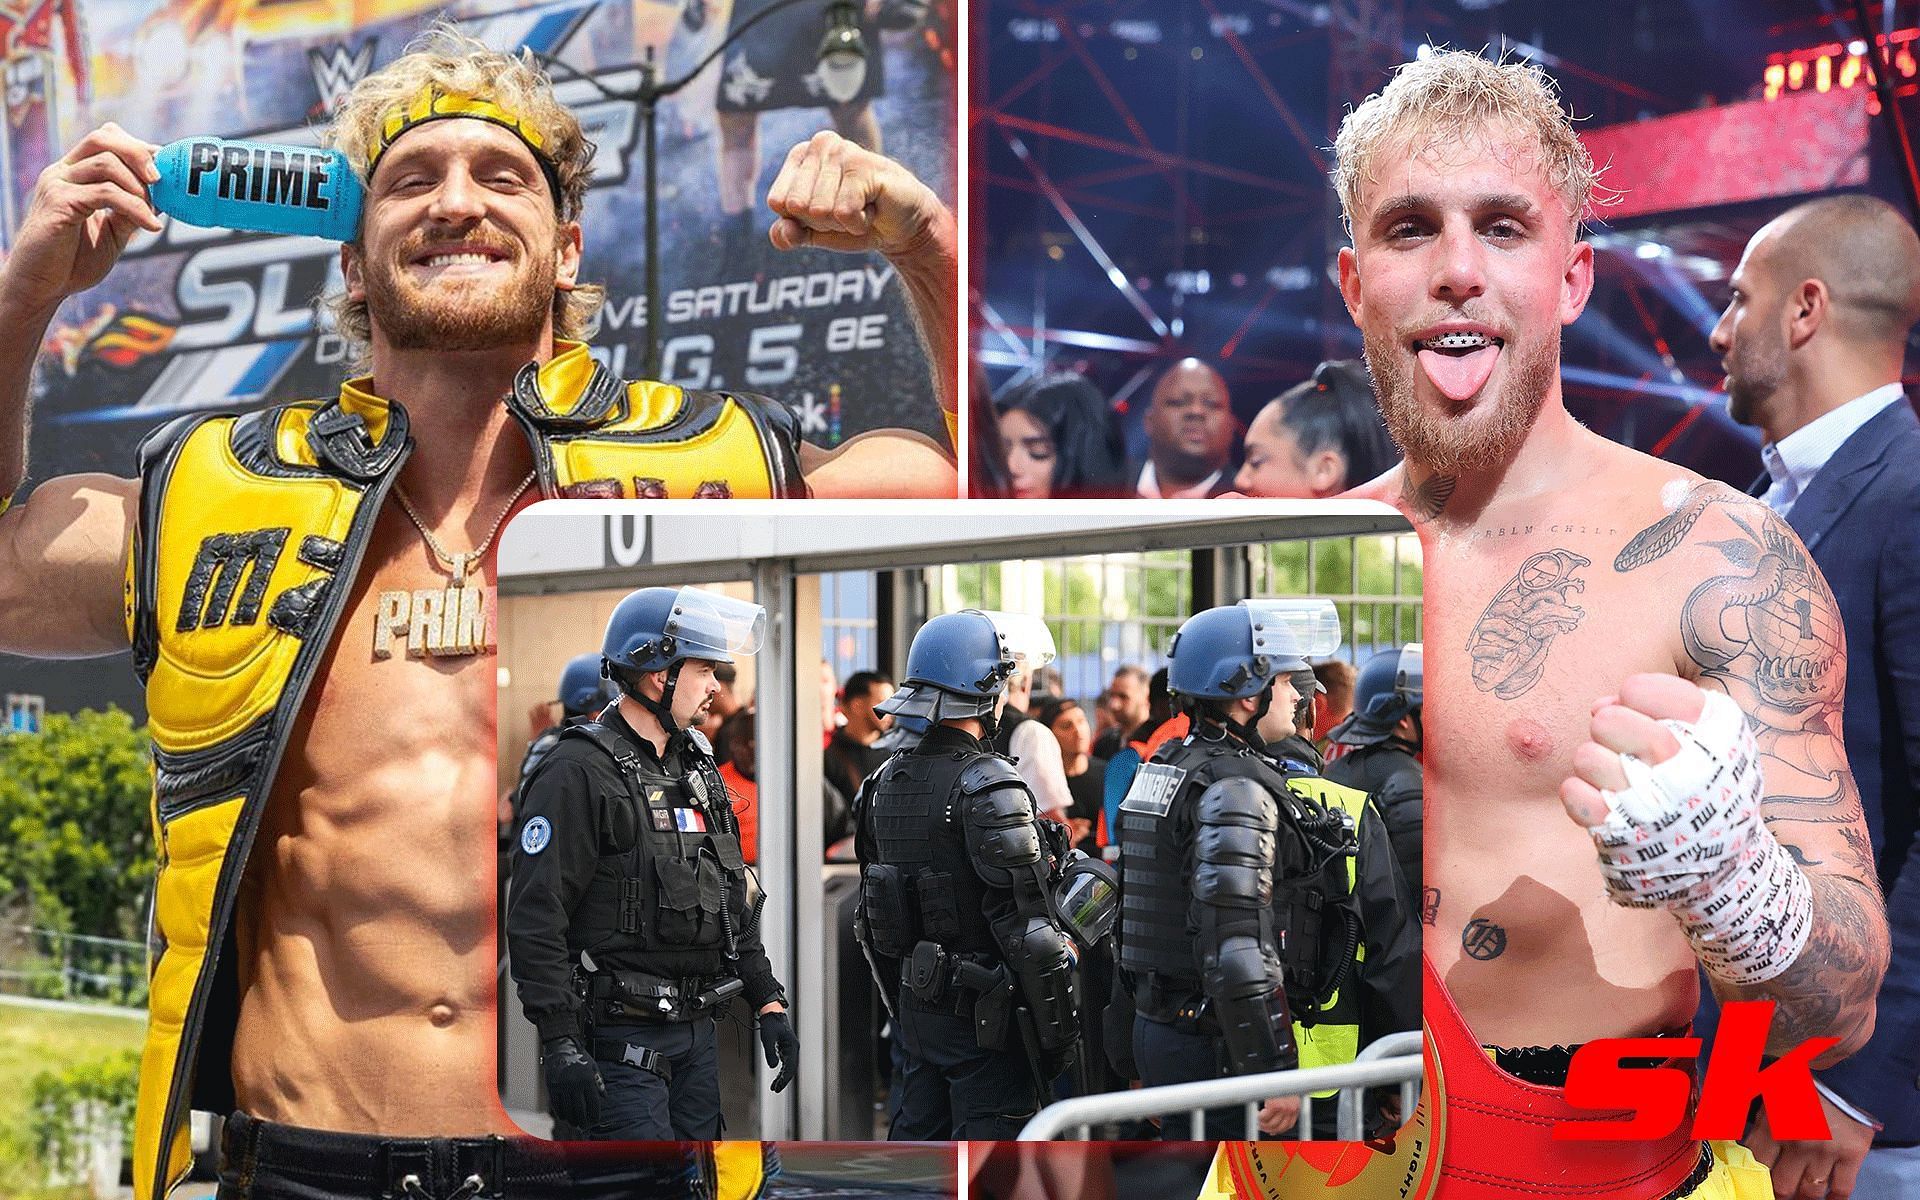 [Images via @loganpaul Instagram and Getty Images]